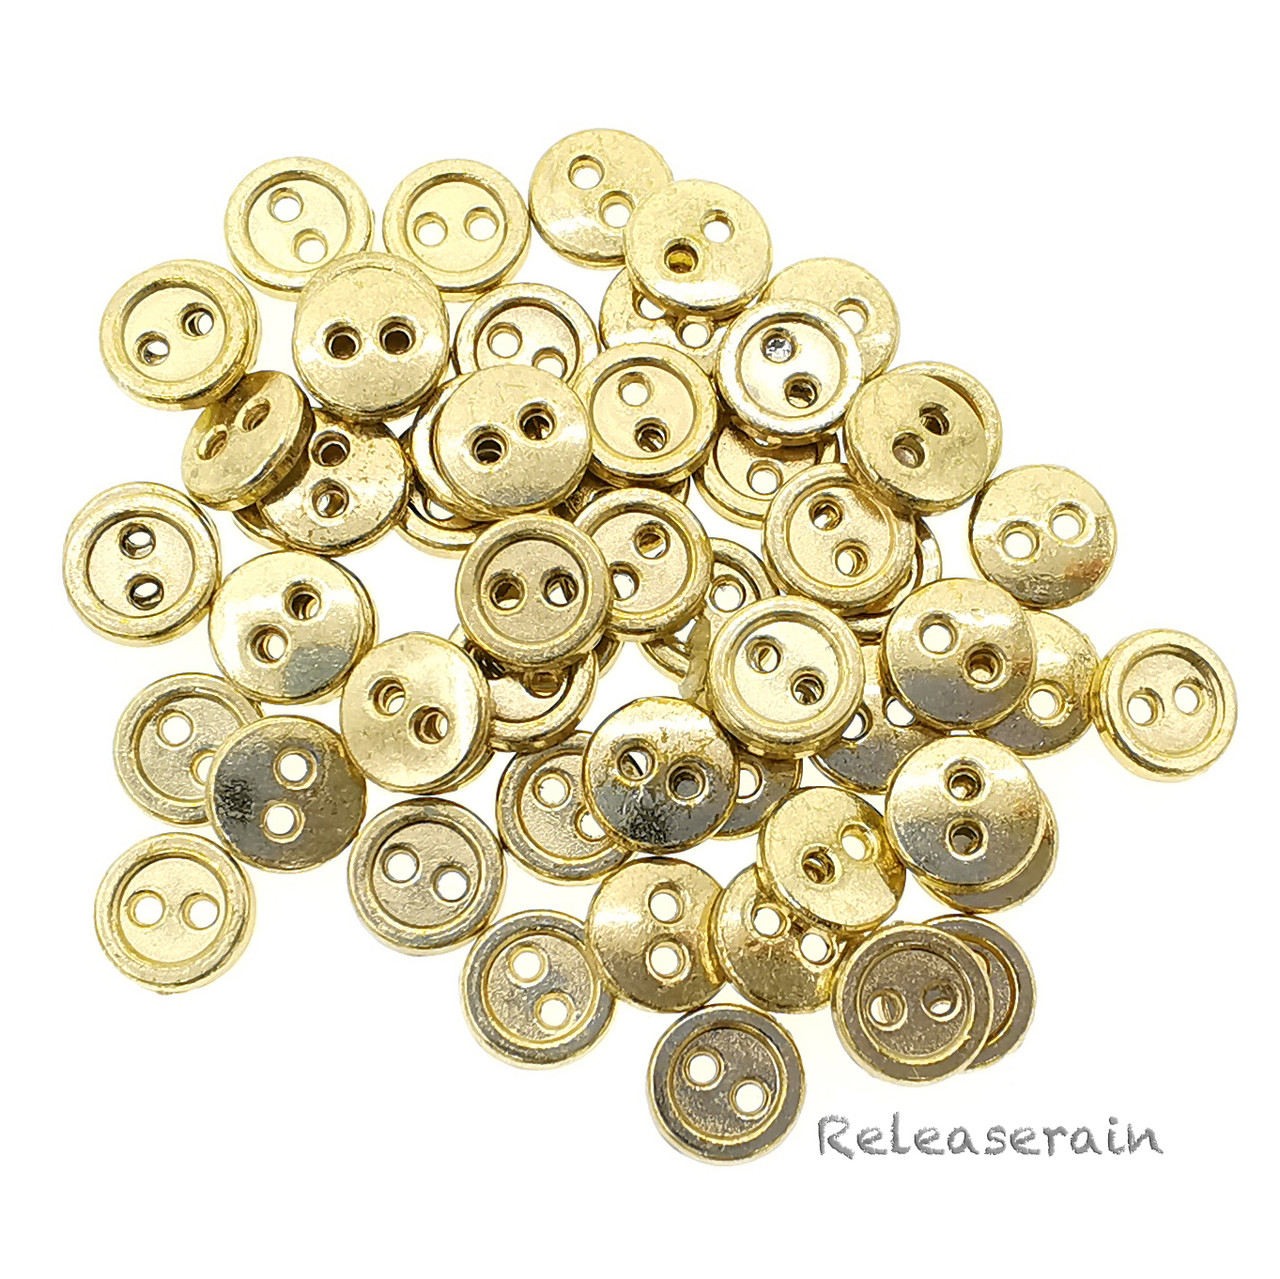 20 Two-holes Buttons 7mm / Many Colors / Plastic Buttons 